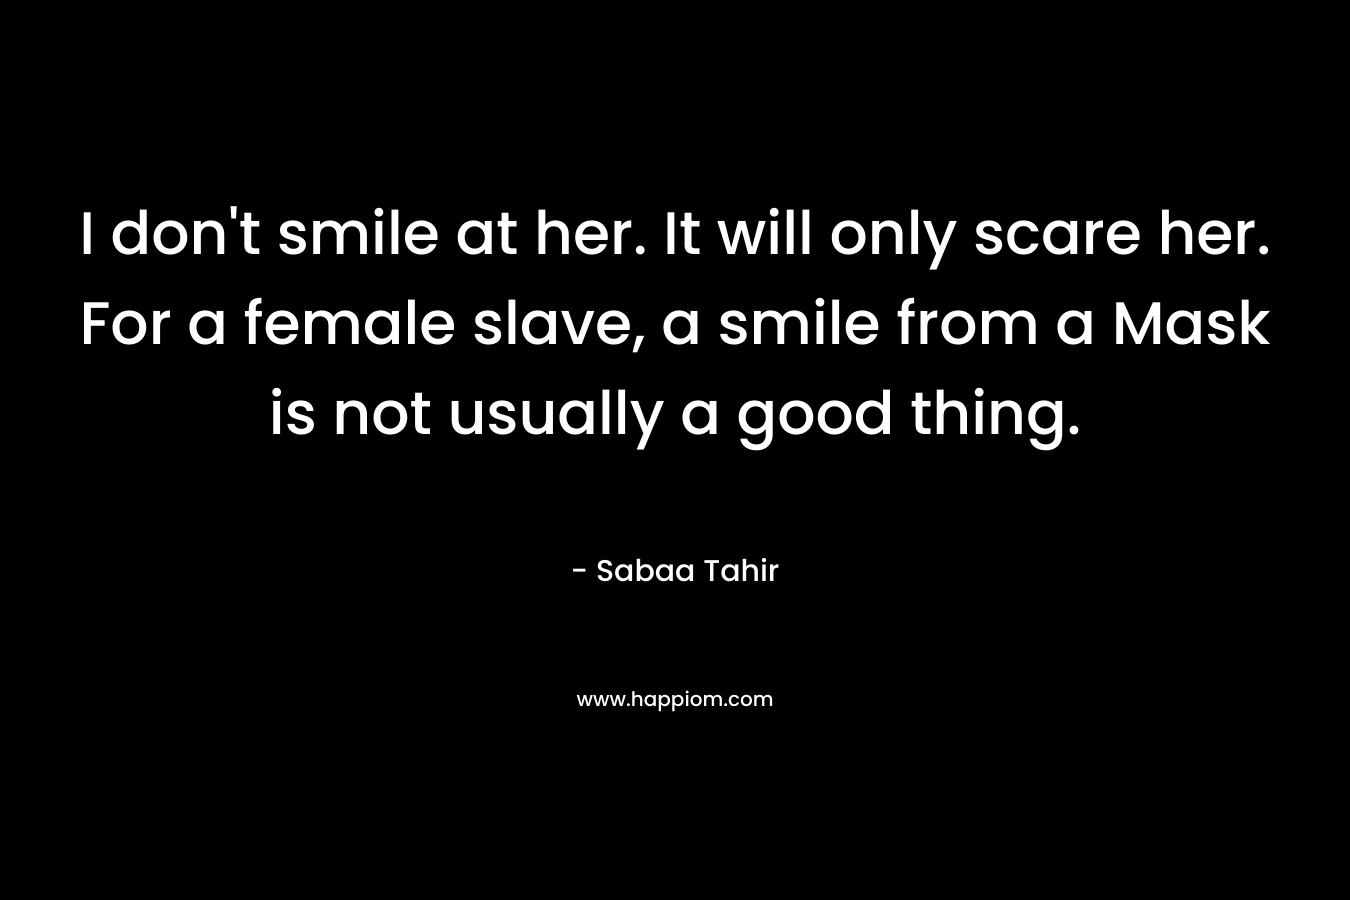 I don’t smile at her. It will only scare her. For a female slave, a smile from a Mask is not usually a good thing. – Sabaa Tahir